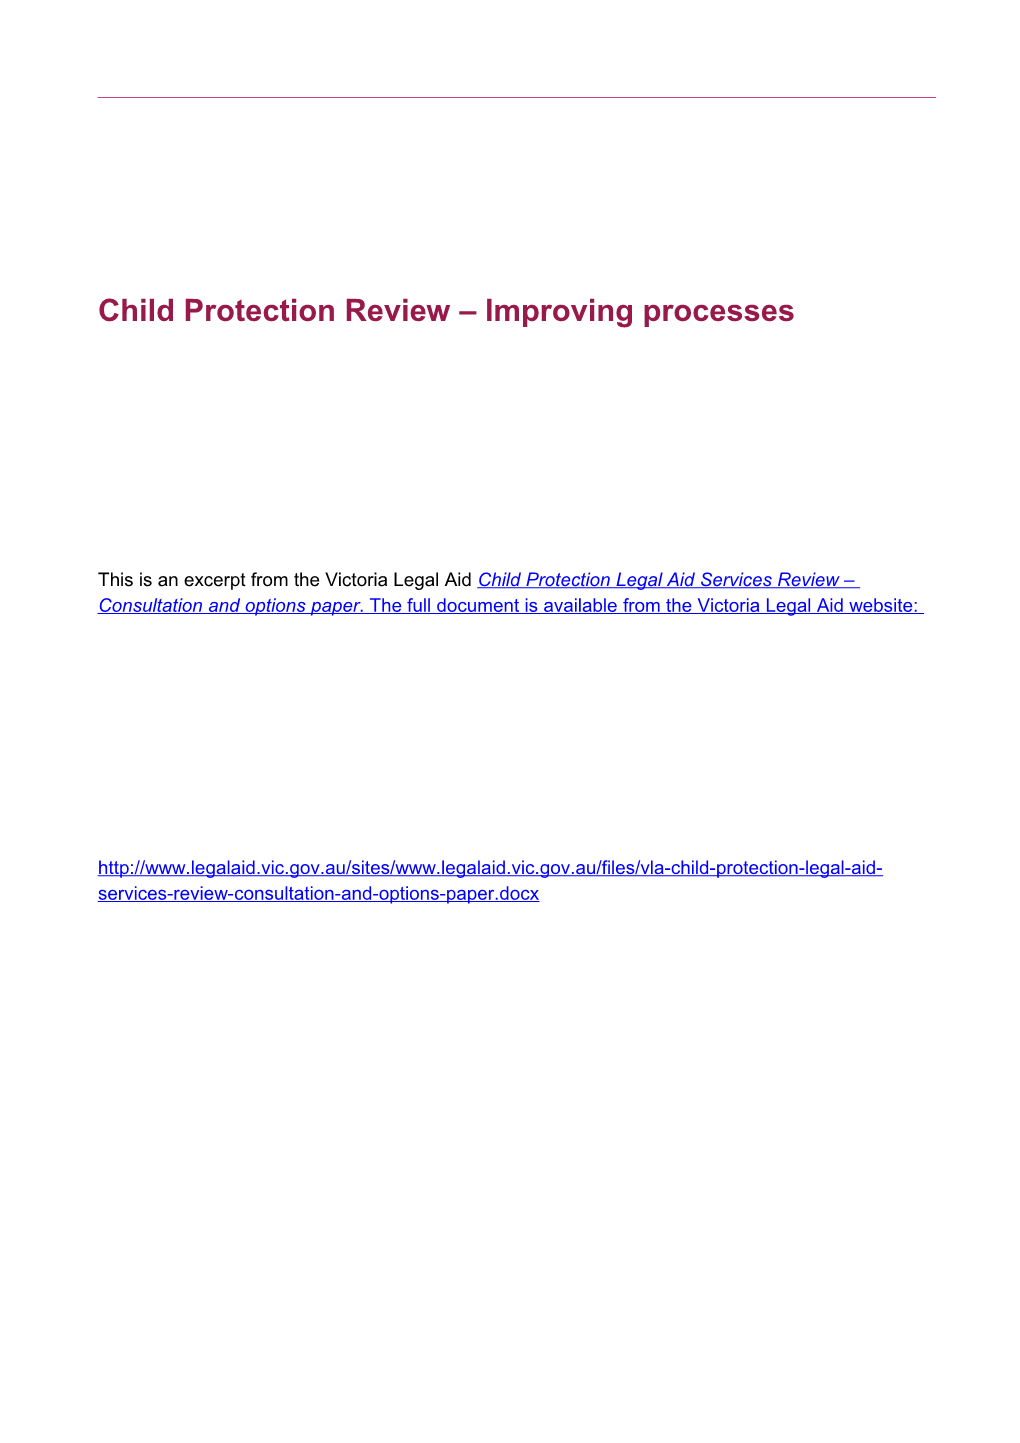 Child Protection Legal Aid Services Review Consultation and Options Paper